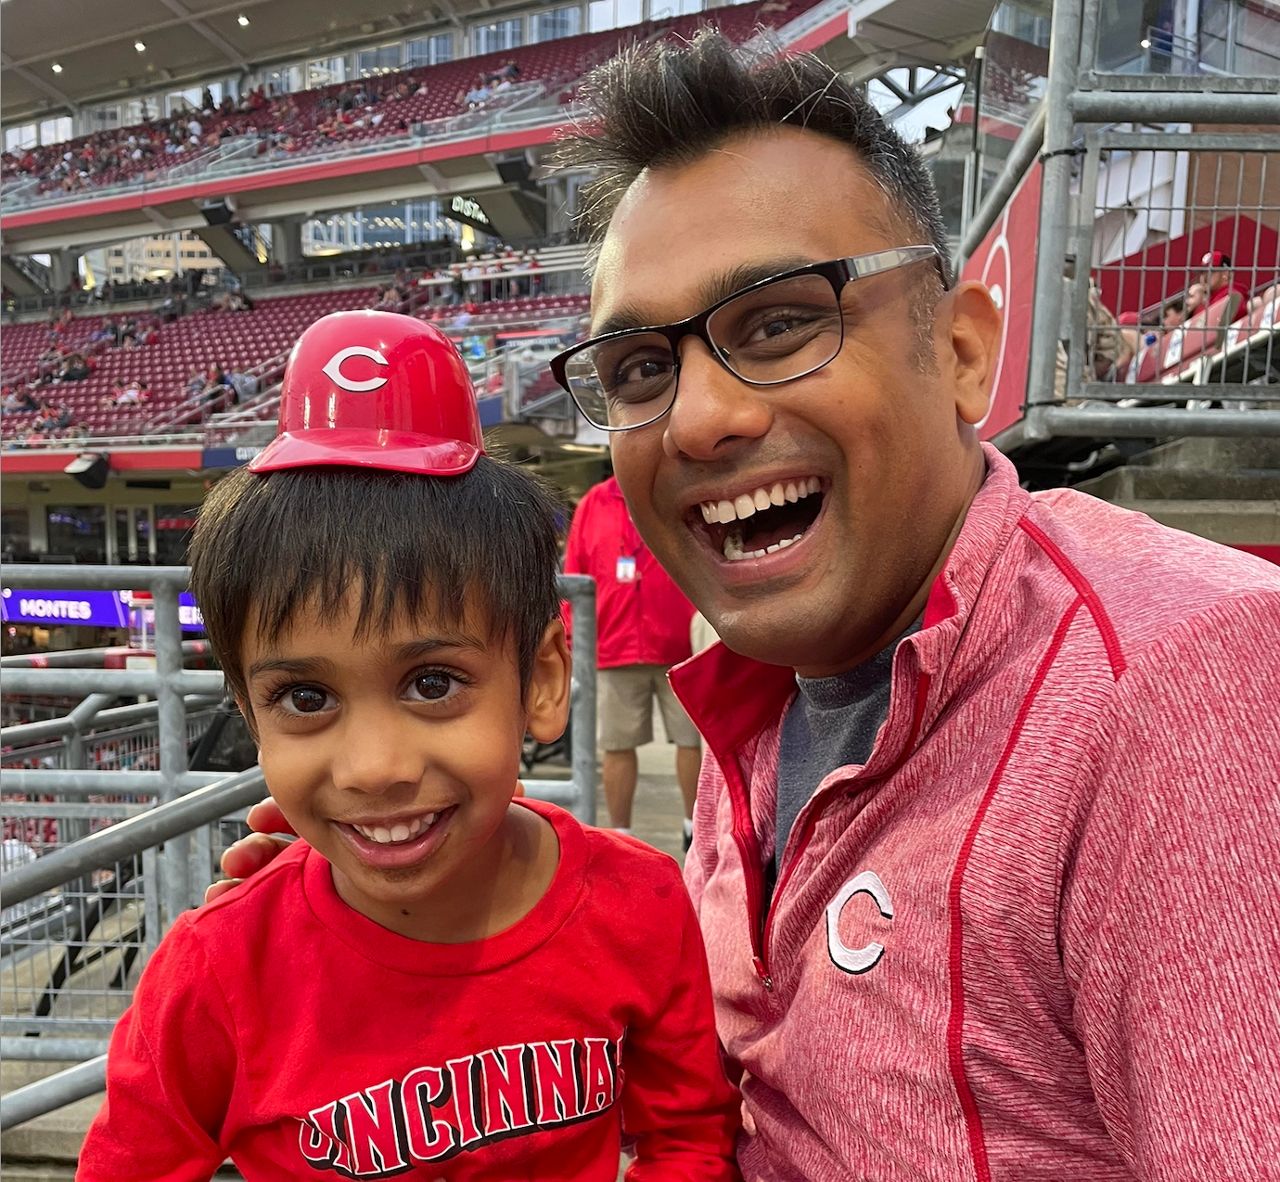 Pavan Parikh would love for Cincinnati to enter into a new golden age of sports so he can enjoy it with his two sons. (Photo courtesy of Pavan Parikh)